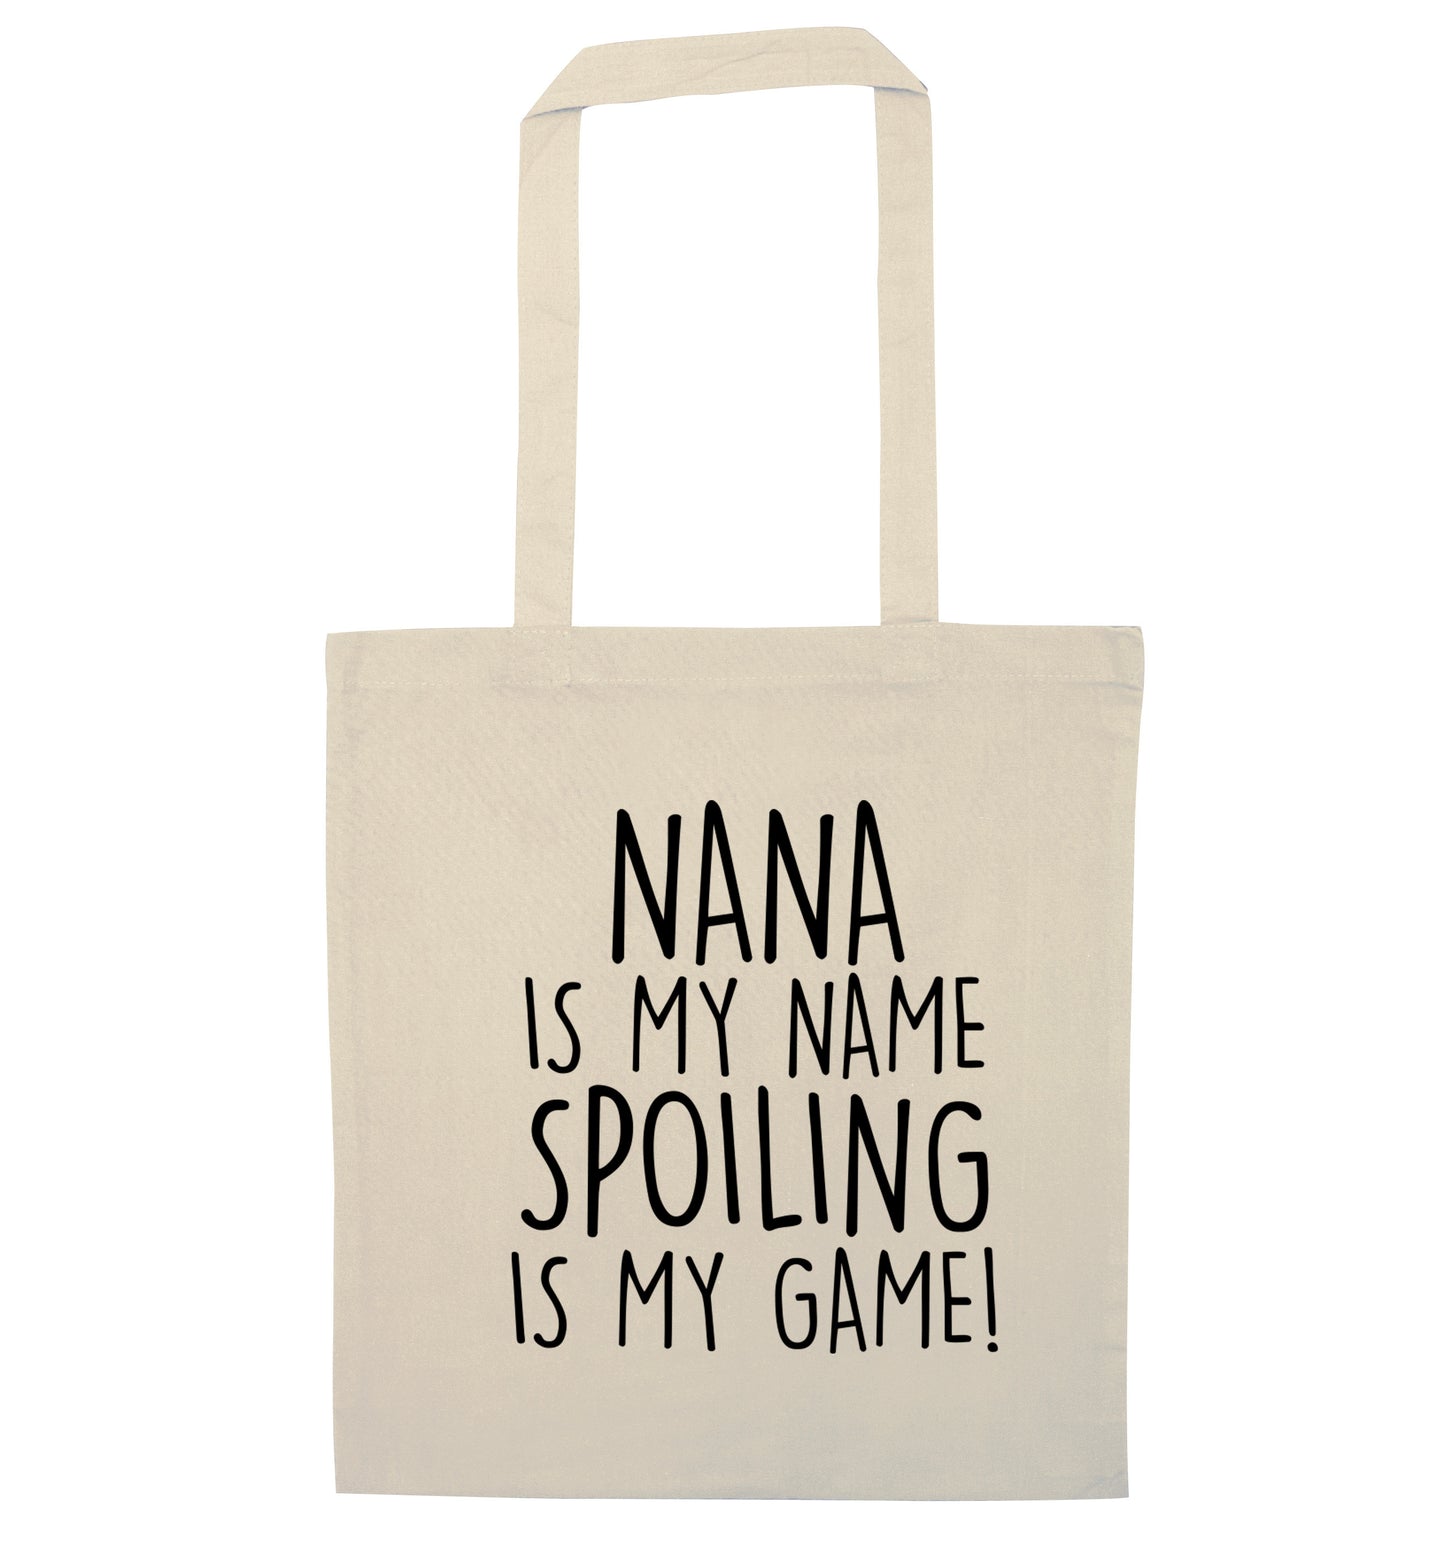 Nana is my name, spoiling is my game natural tote bag